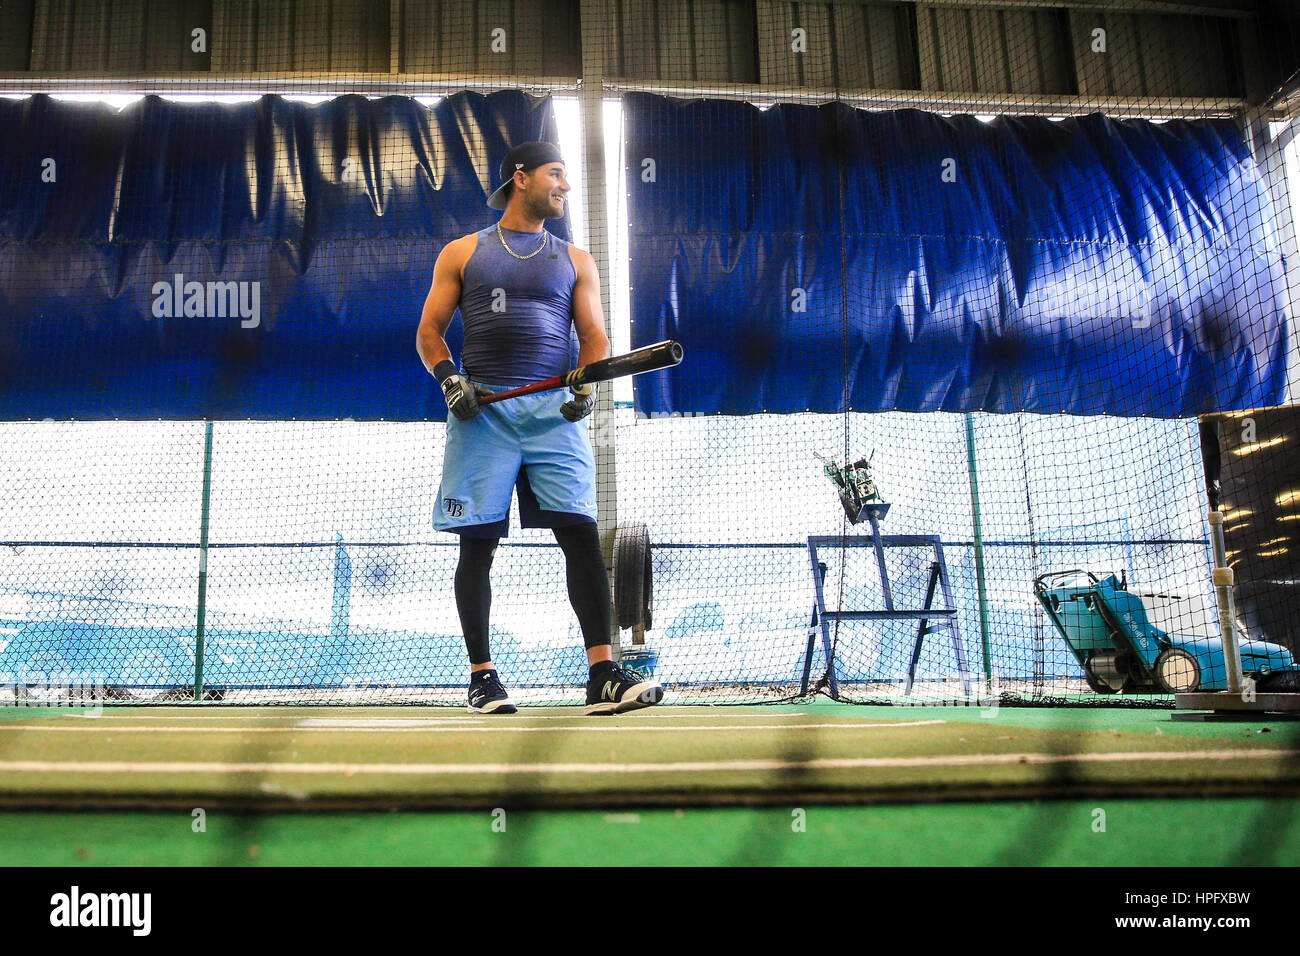 Port Charlotte, Florida, USA. 22nd Feb, 2017. WILL VRAGOVIC | Times.Tampa Bay Rays center fielder Kevin Kiermaier (39) in the batting cage after wet weather cancelled on-field work at Charlotte Sports Park in Port Charlotte, Fla. on Wednesday, Feb. 22, 2017. Credit: Will Vragovic/Tampa Bay Times/ZUMA Wire/Alamy Live News Stock Photo